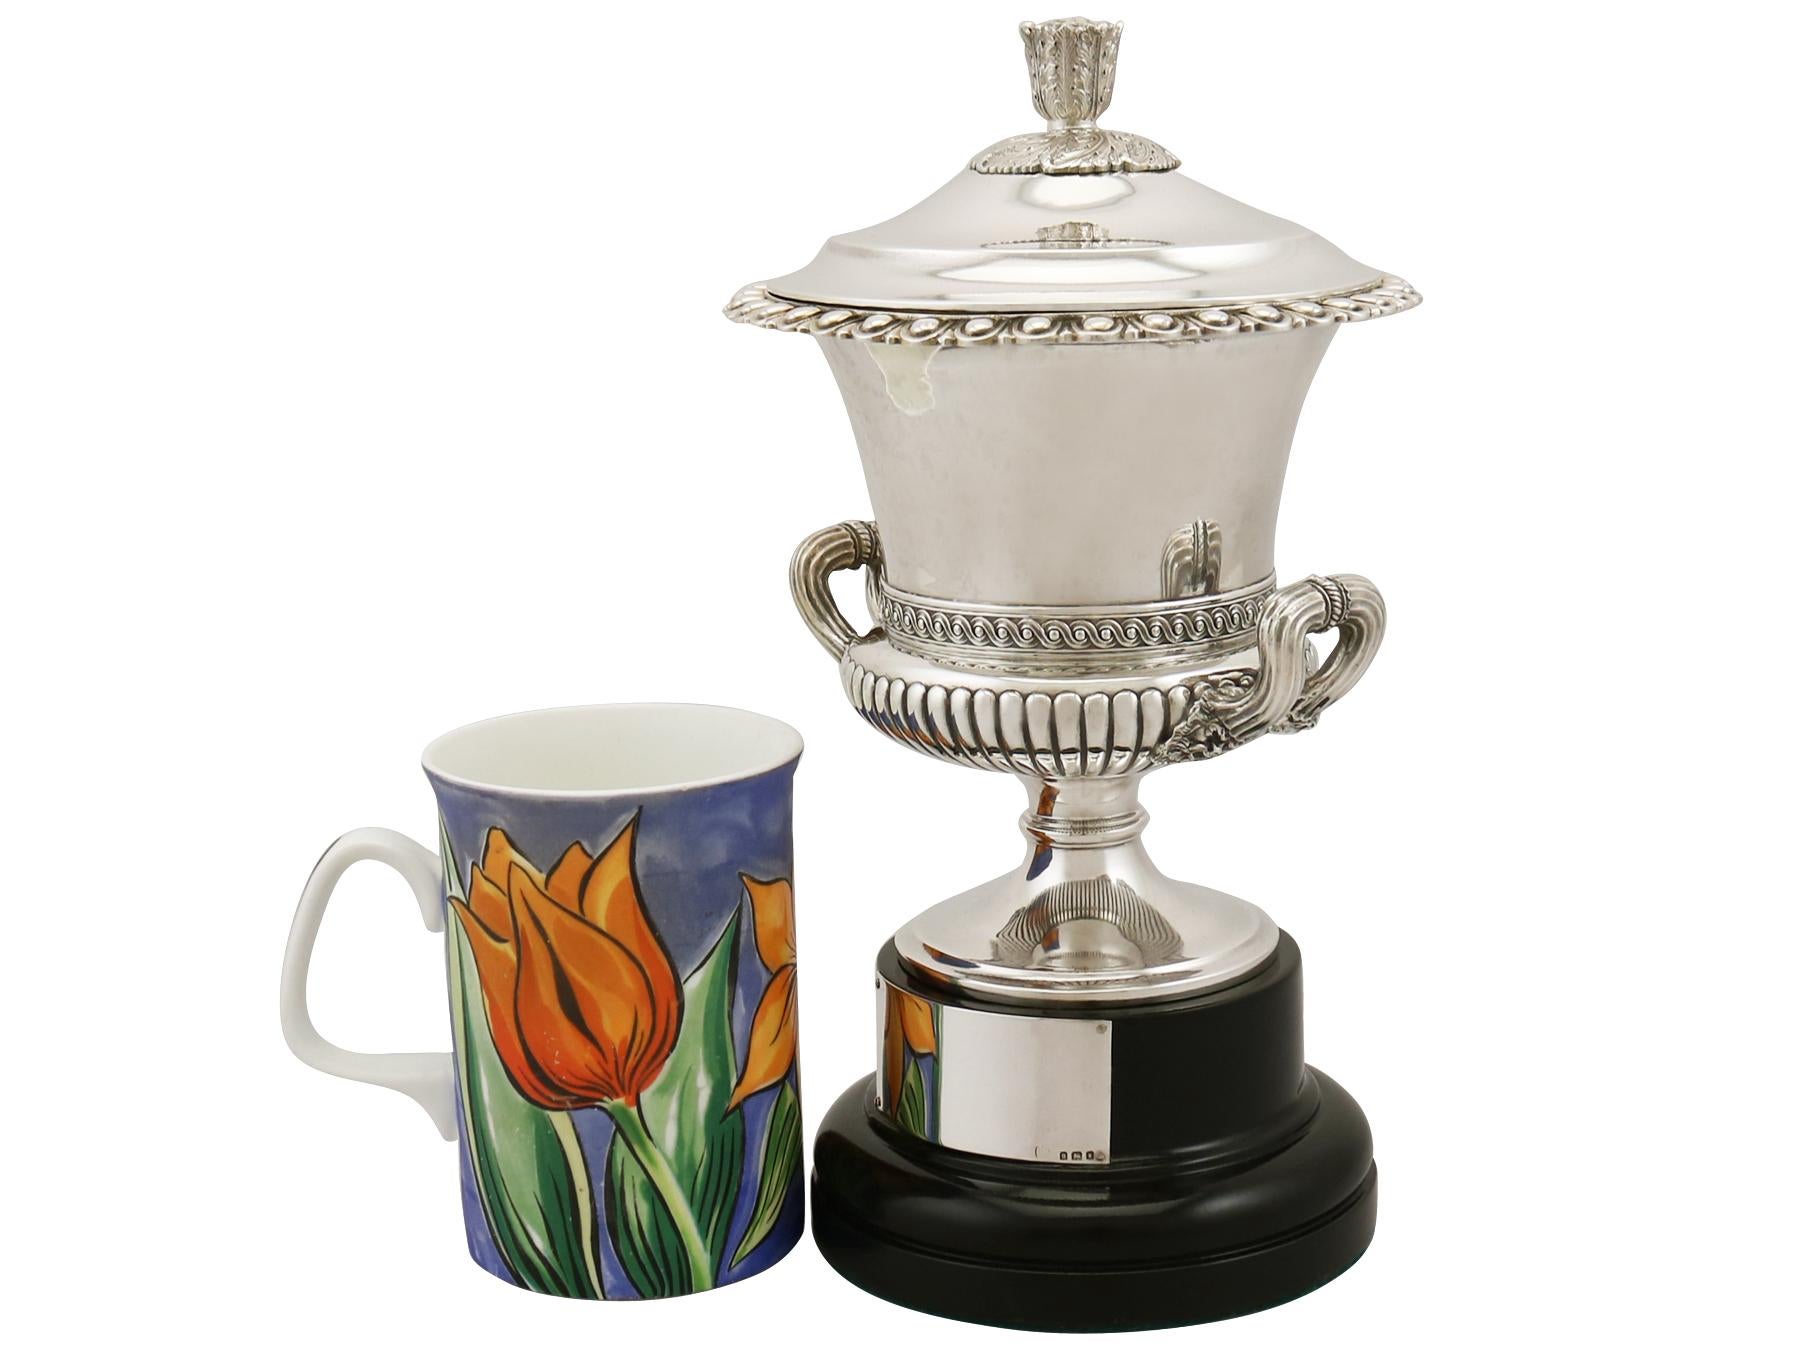 An exceptional, fine and impressive antique George V English sterling silver presentation cup with cover and original plinth; an addition to our presentation silverware collection.

This exceptional antique sterling silver cup with stand has a